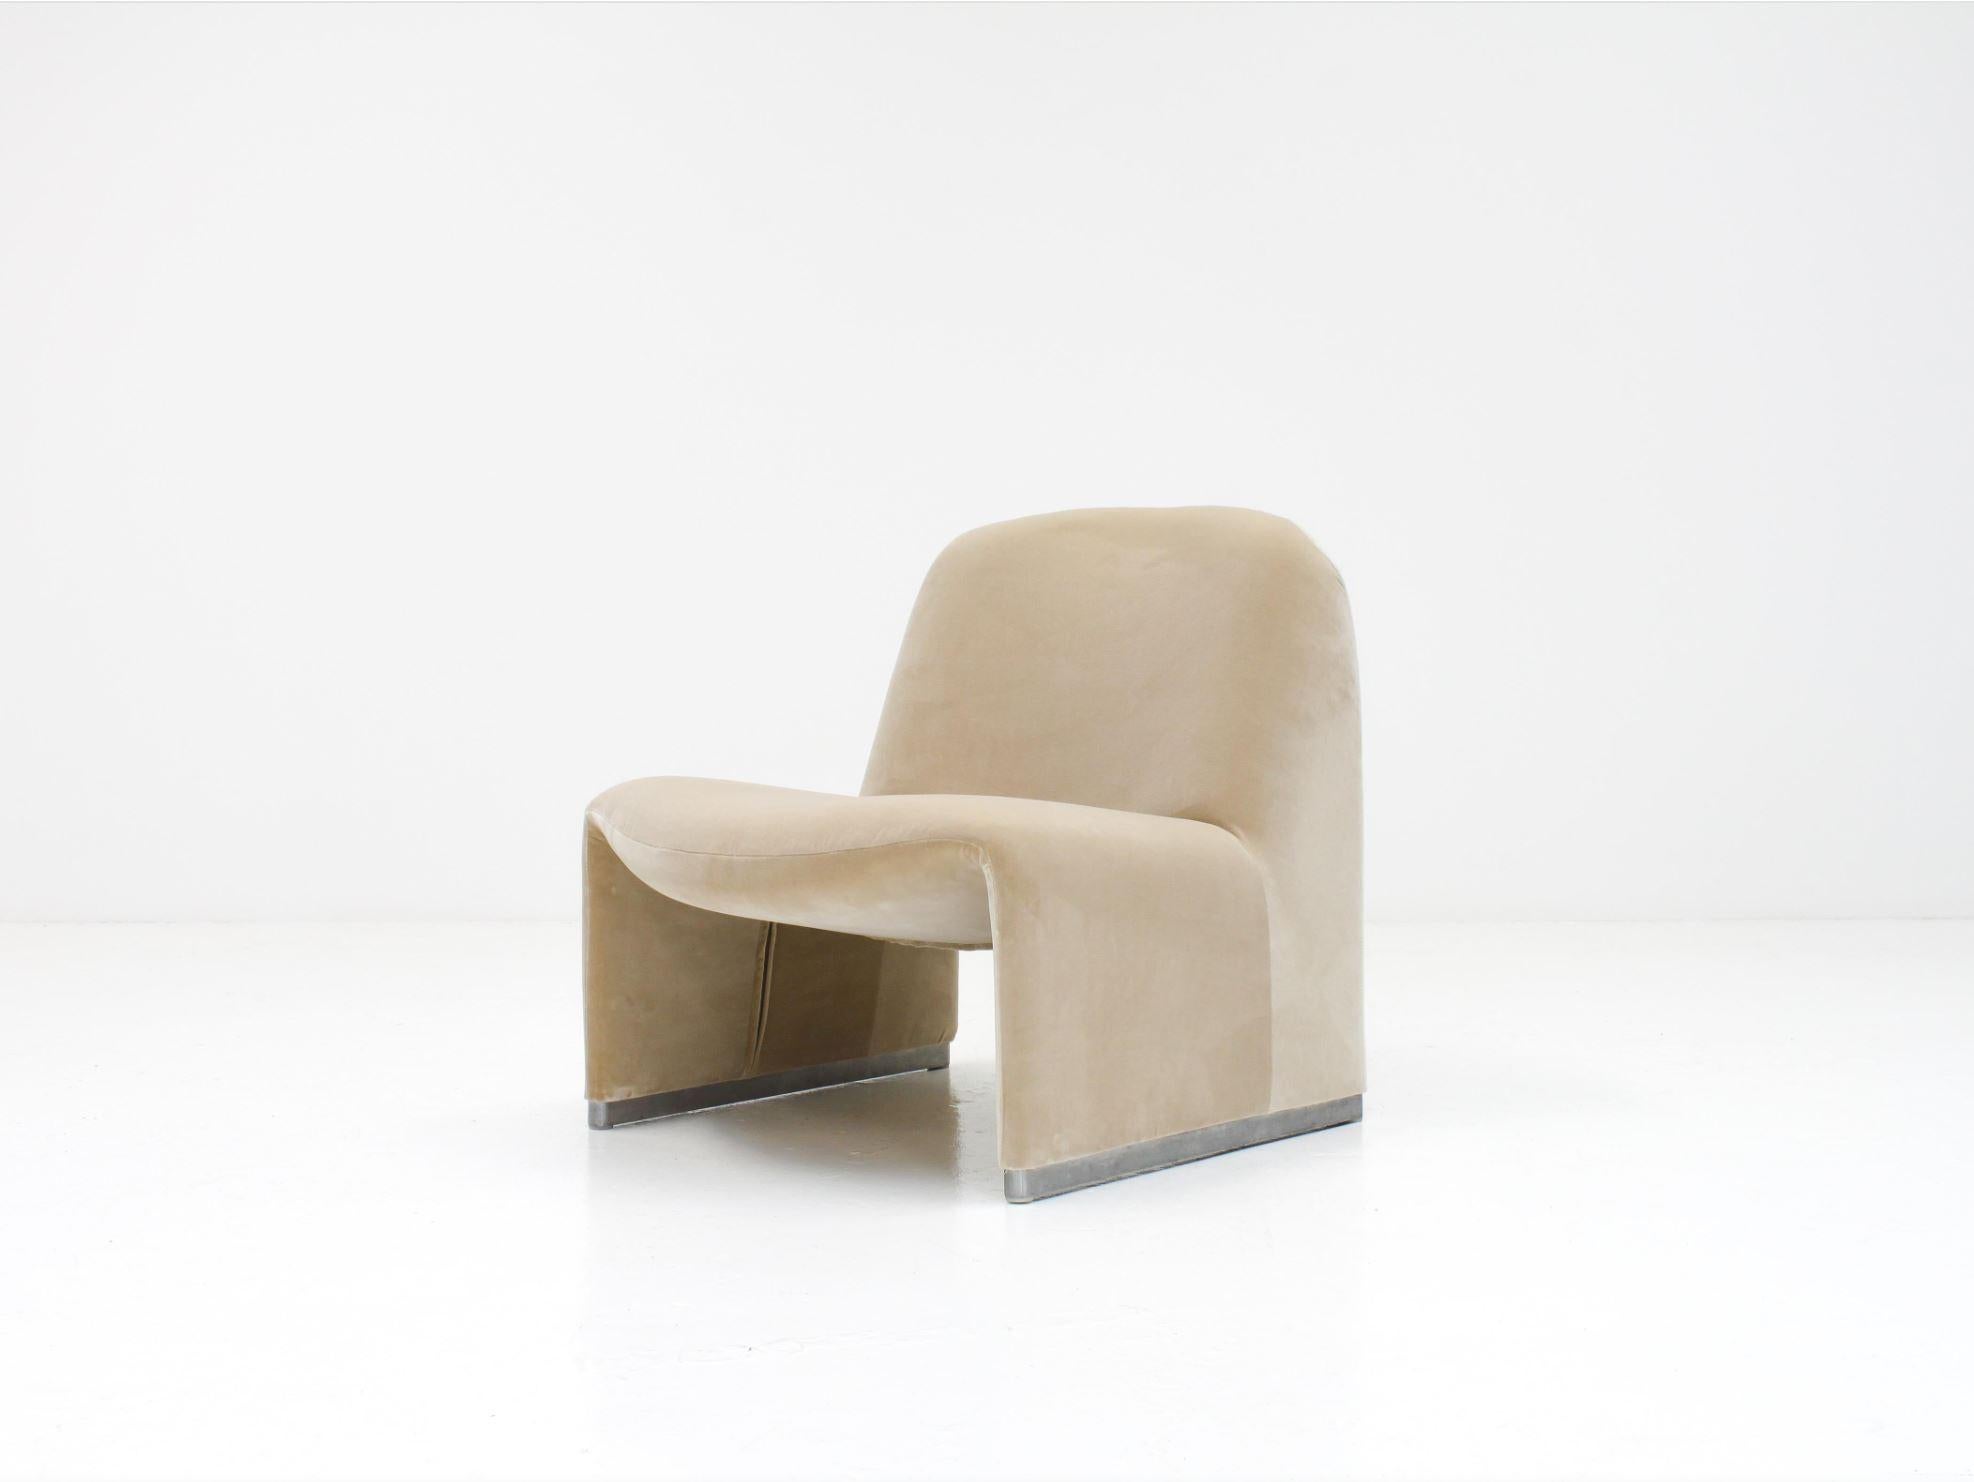 A single Giancarlo Piretti “Alky” chair newly upholstered in Designers Guild linen-colored cotton velvet. 

Manufactured by Artifort in the 1970s.

The organic shape offers a minimal appearance but also comfort.

*Potentially customizable in over